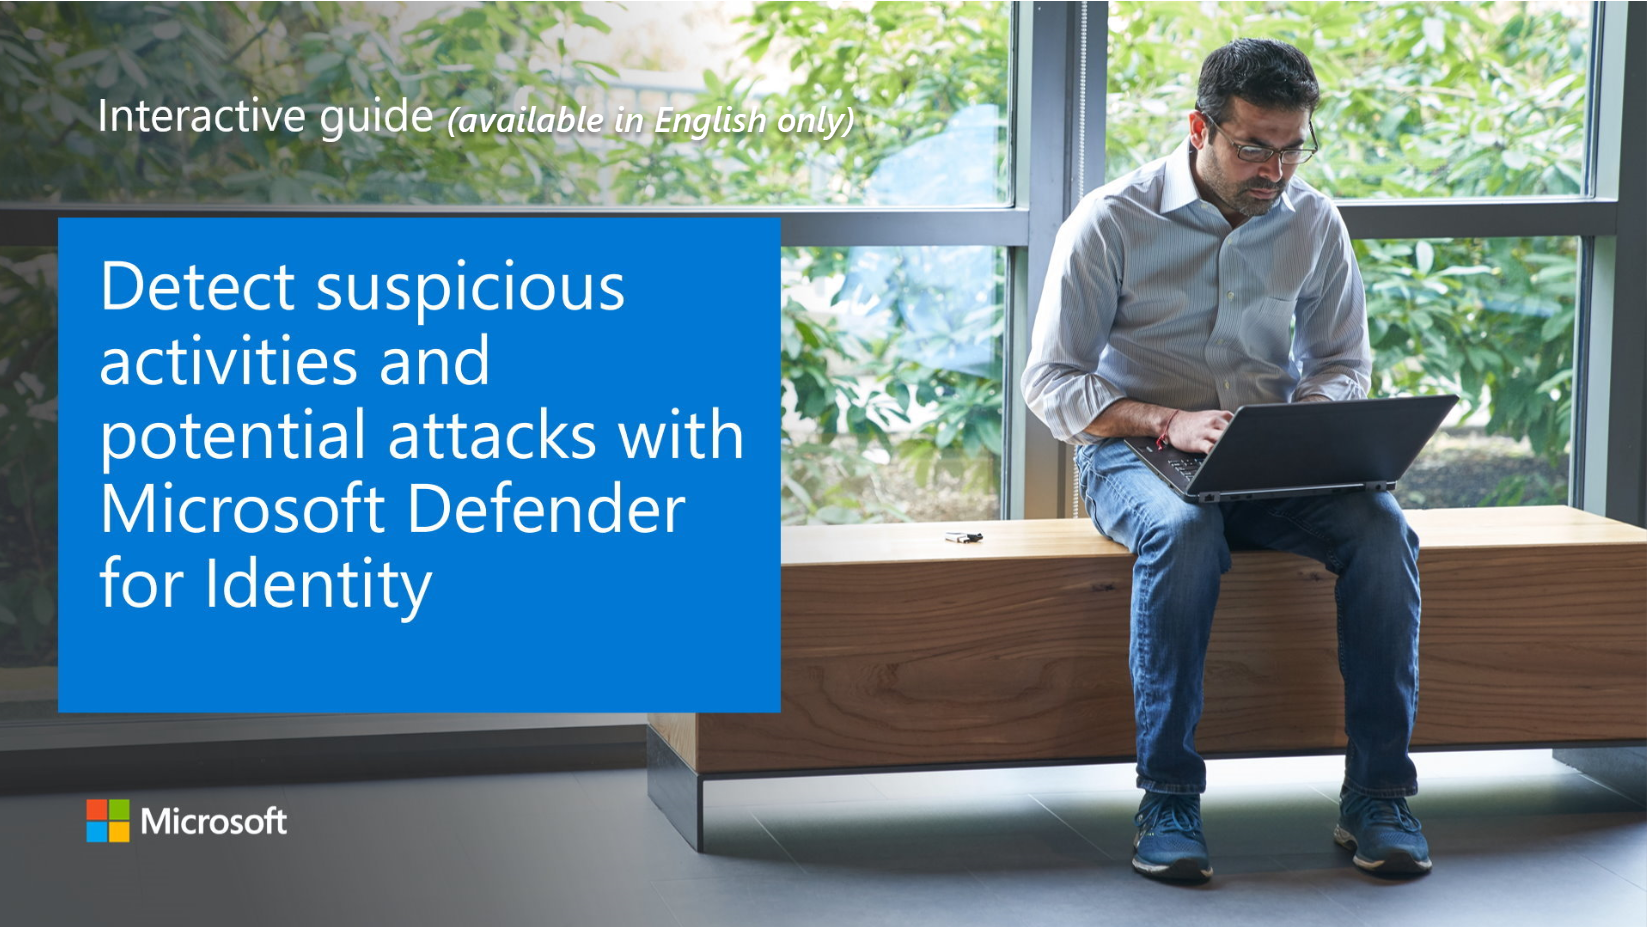 Detect suspicious activities and potential attacks with Microsoft Defender for Identity.